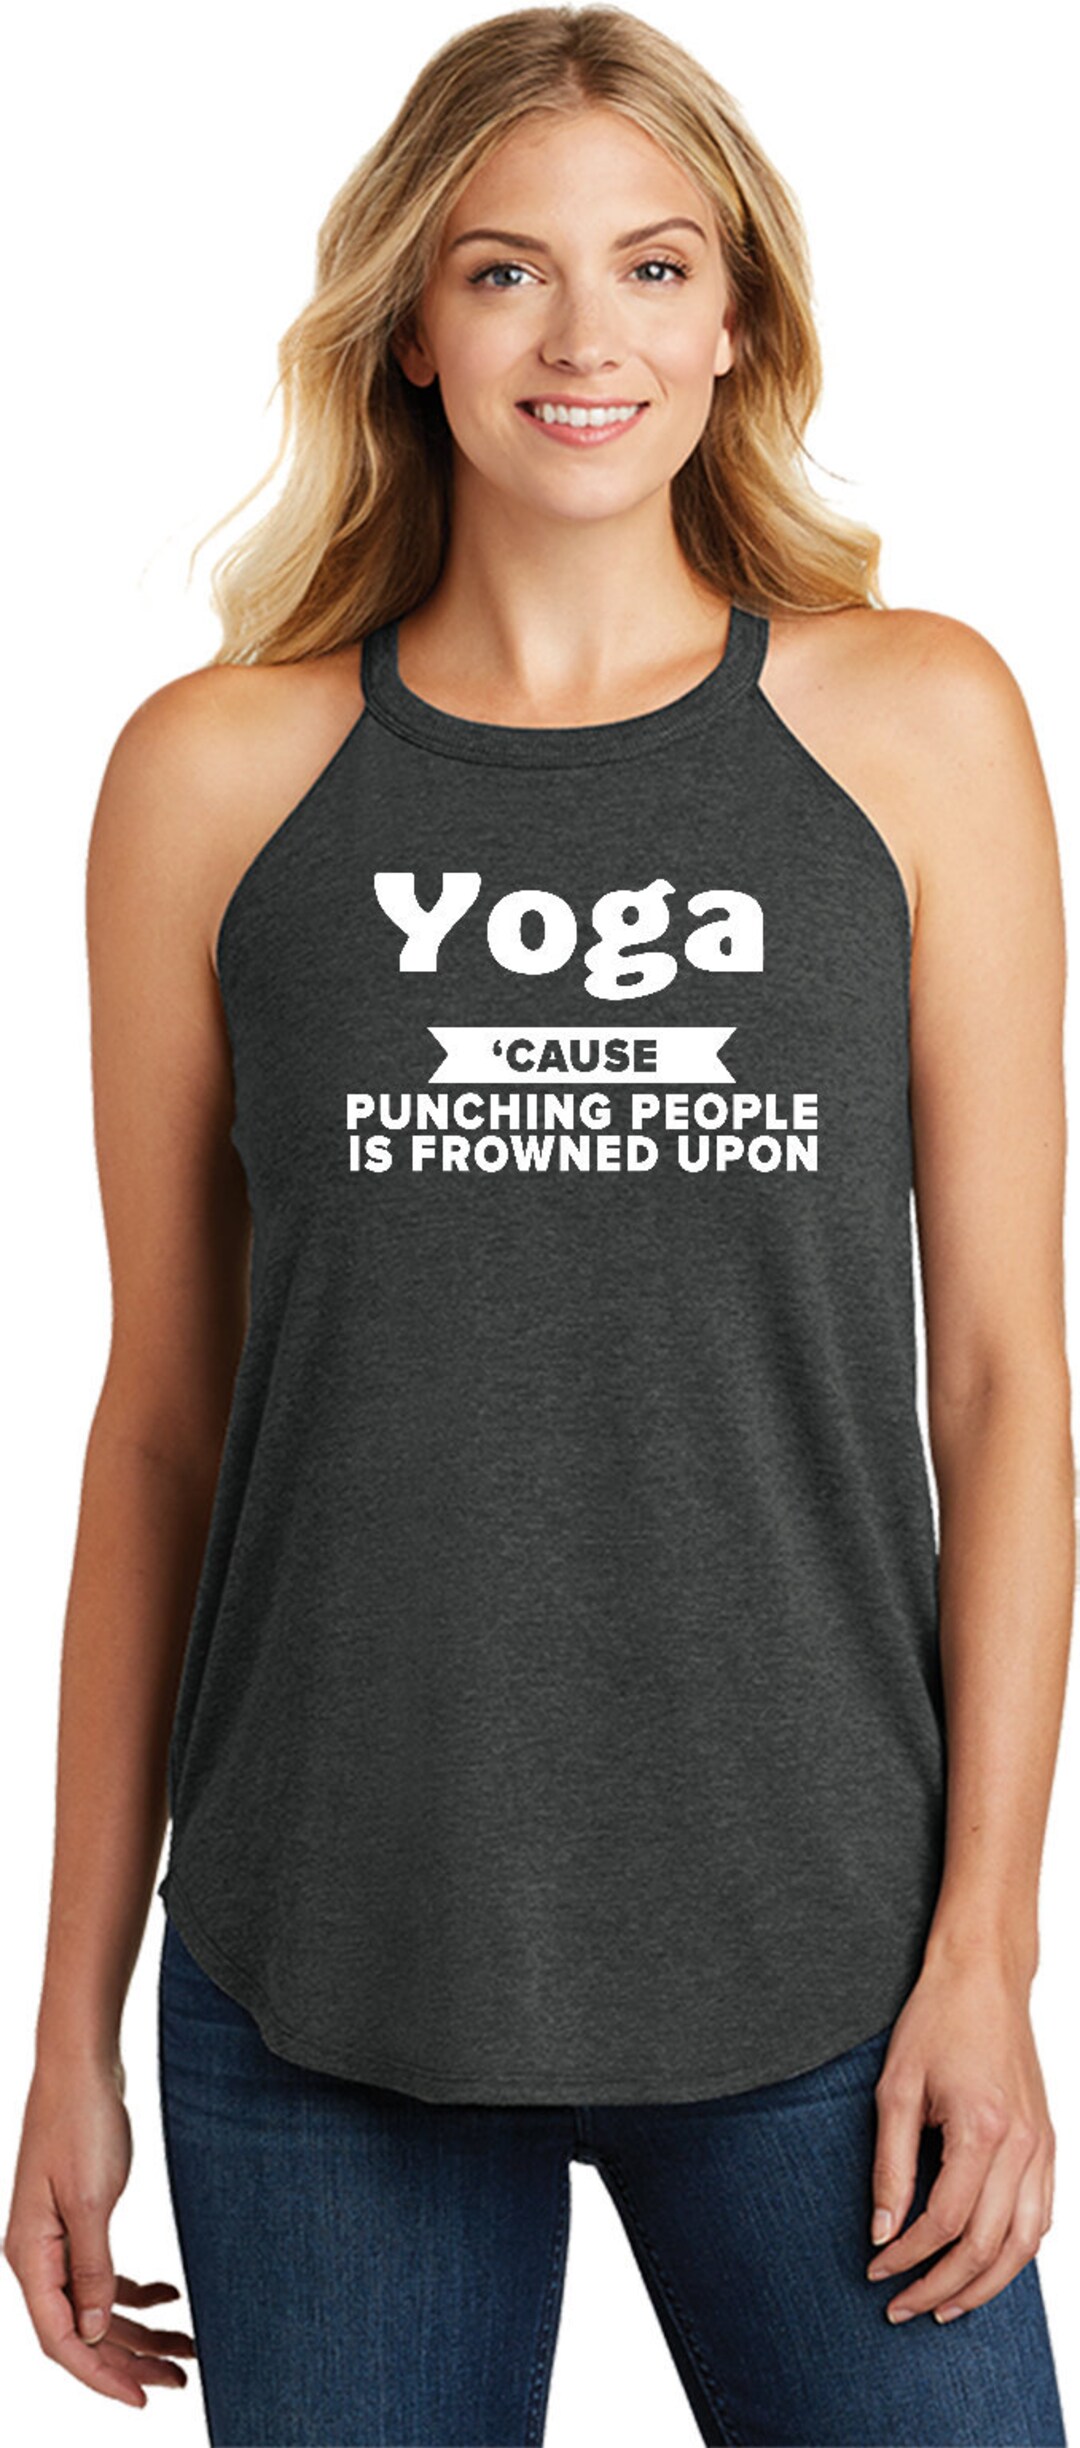 Yoga 'cause Punching People is Frowned Upon Ladies Yoga - Etsy